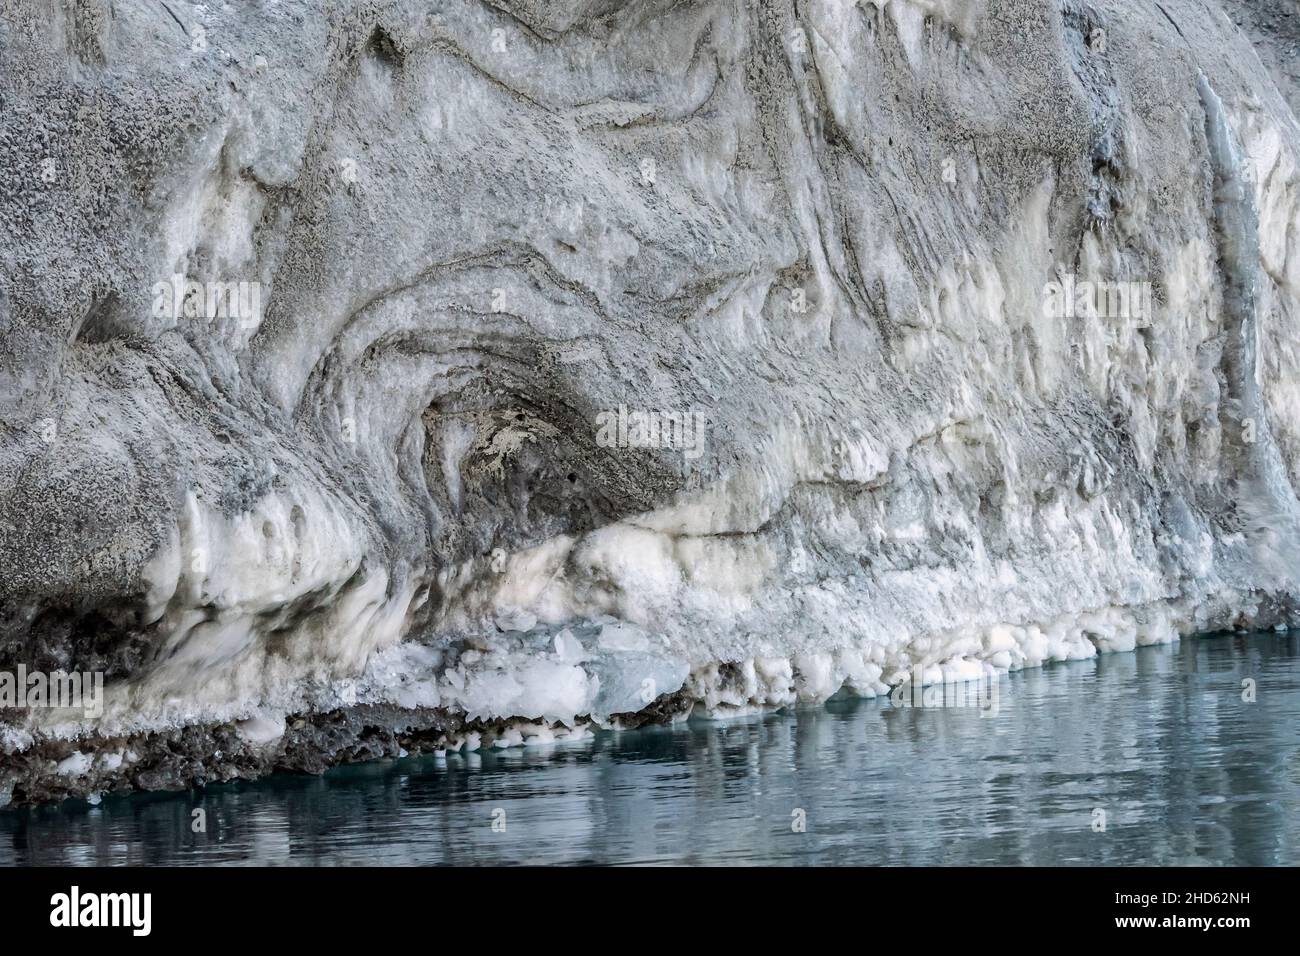 Rolige Brae lateral moraine with sand-coated ice, Rodefjord, Scoresby Sund, East Greenland Stock Photo